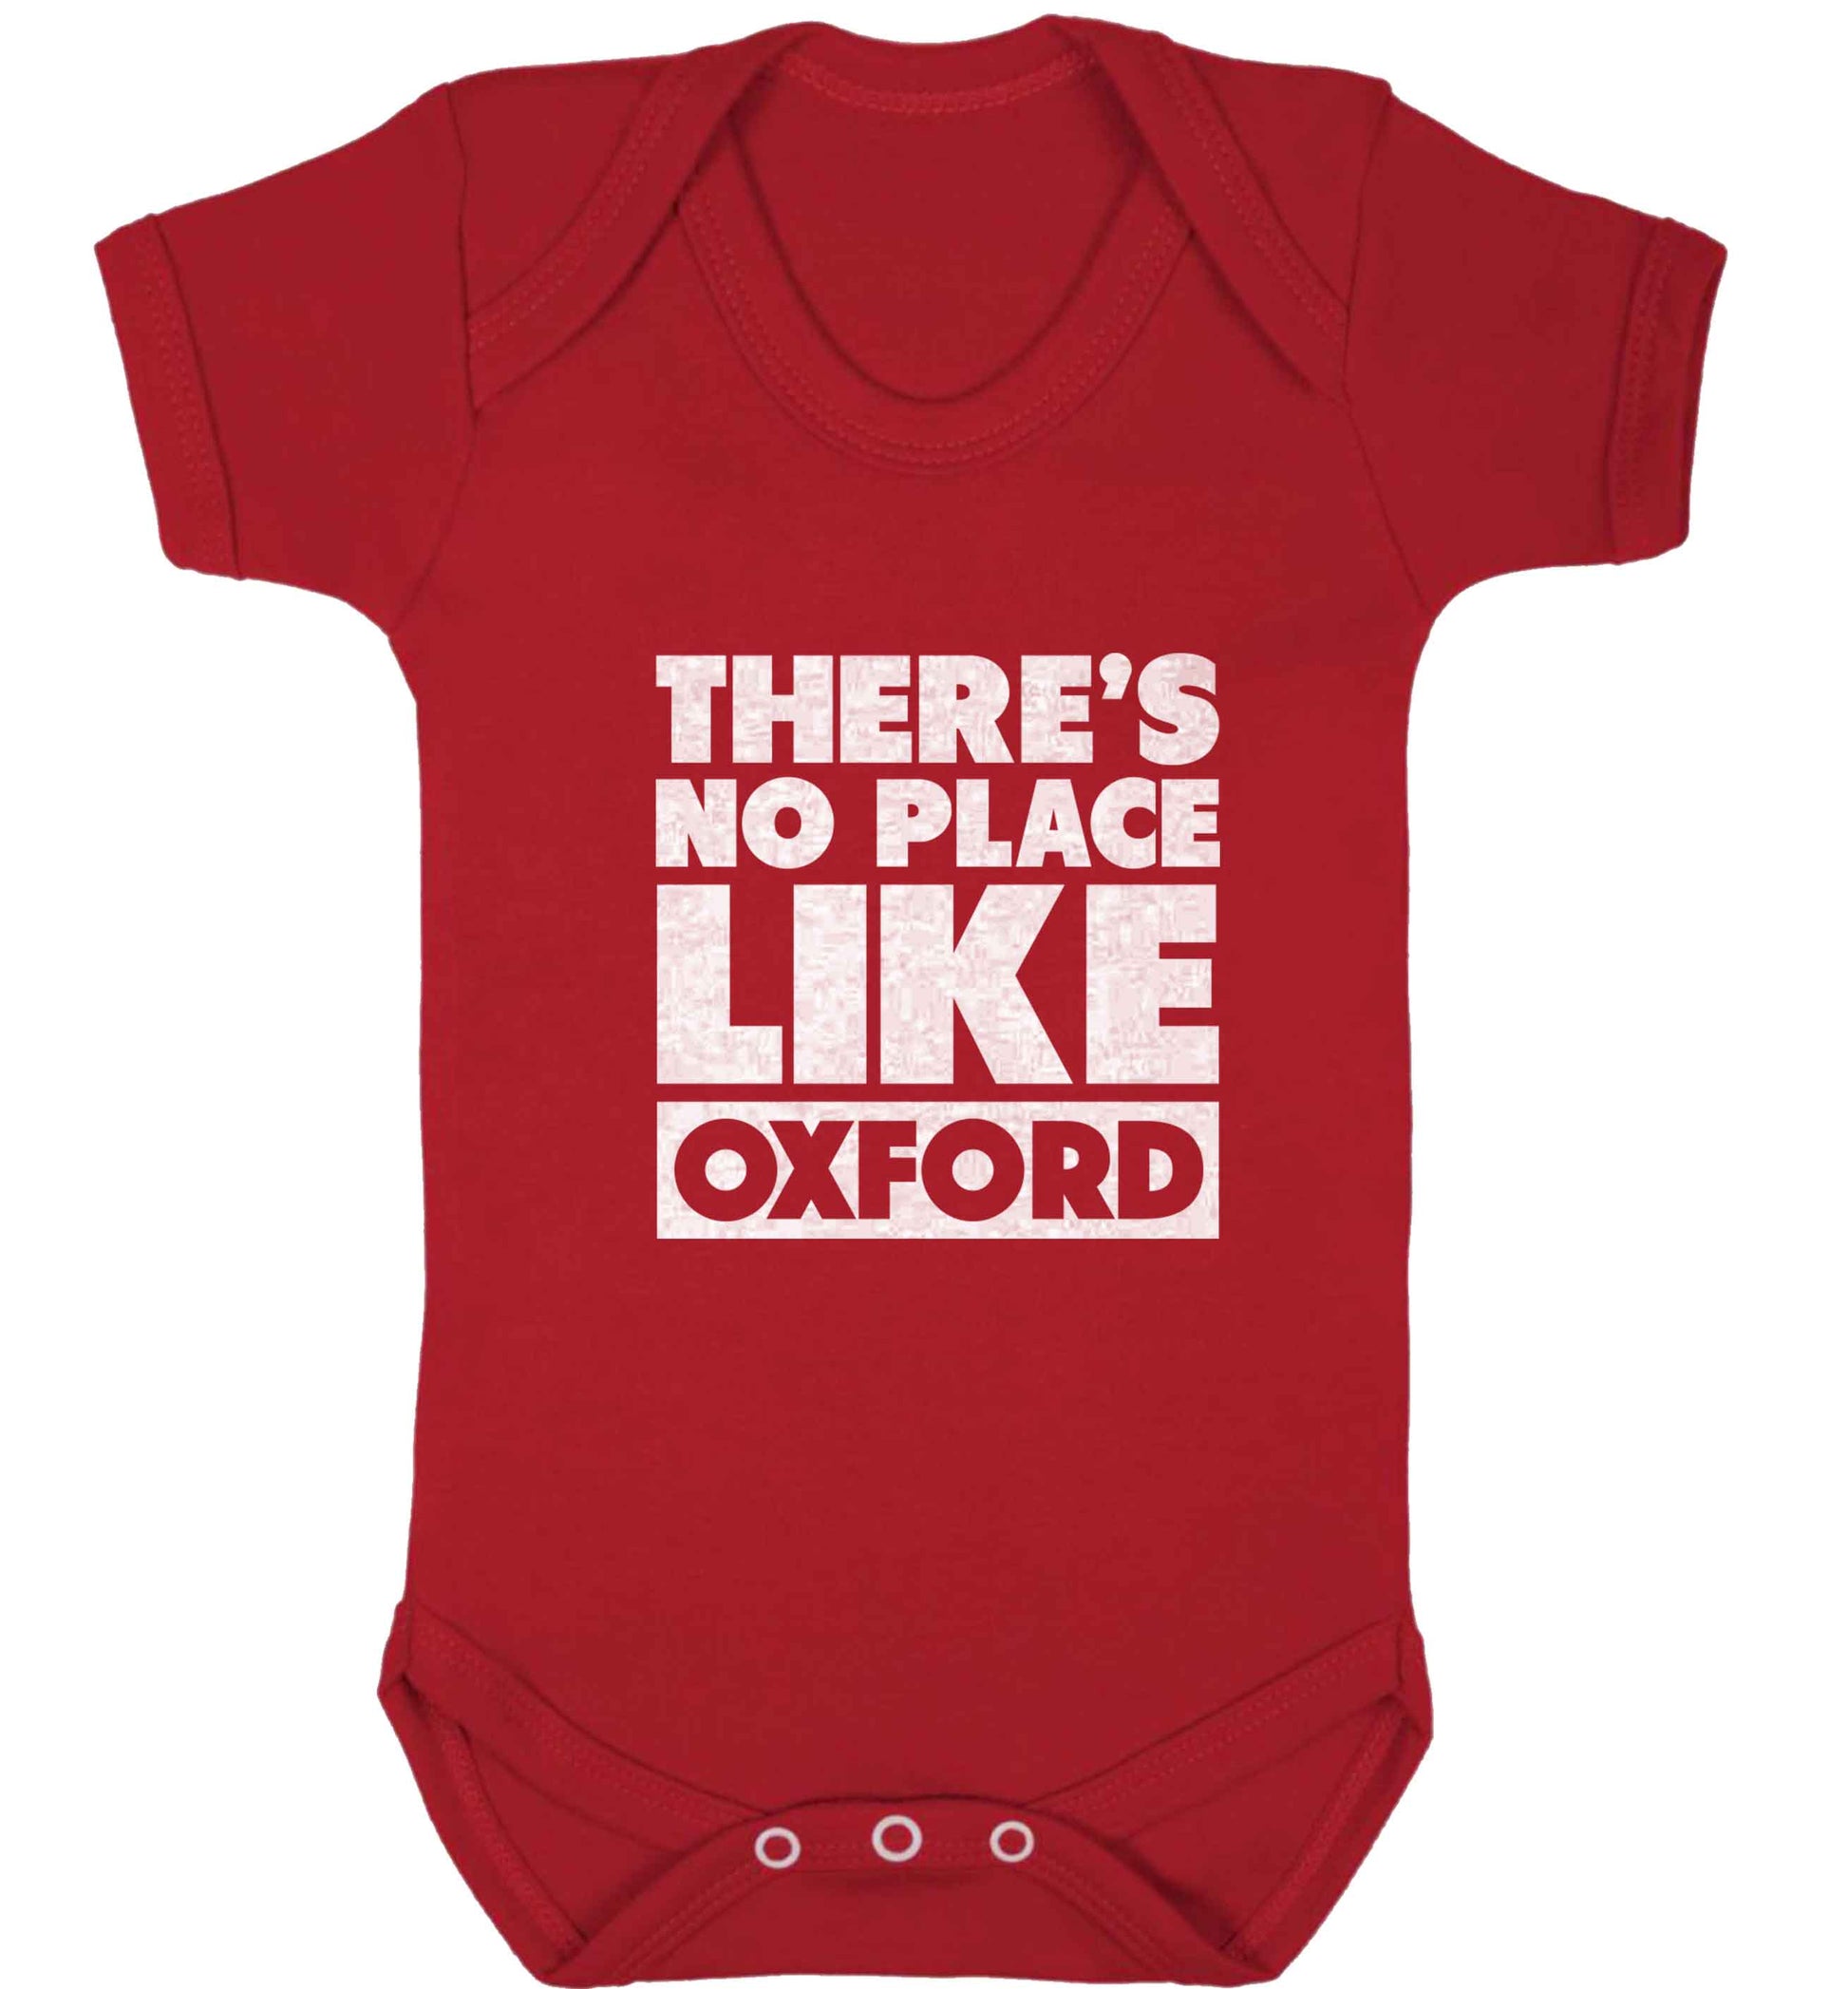 There's no place like Oxford baby vest red 18-24 months